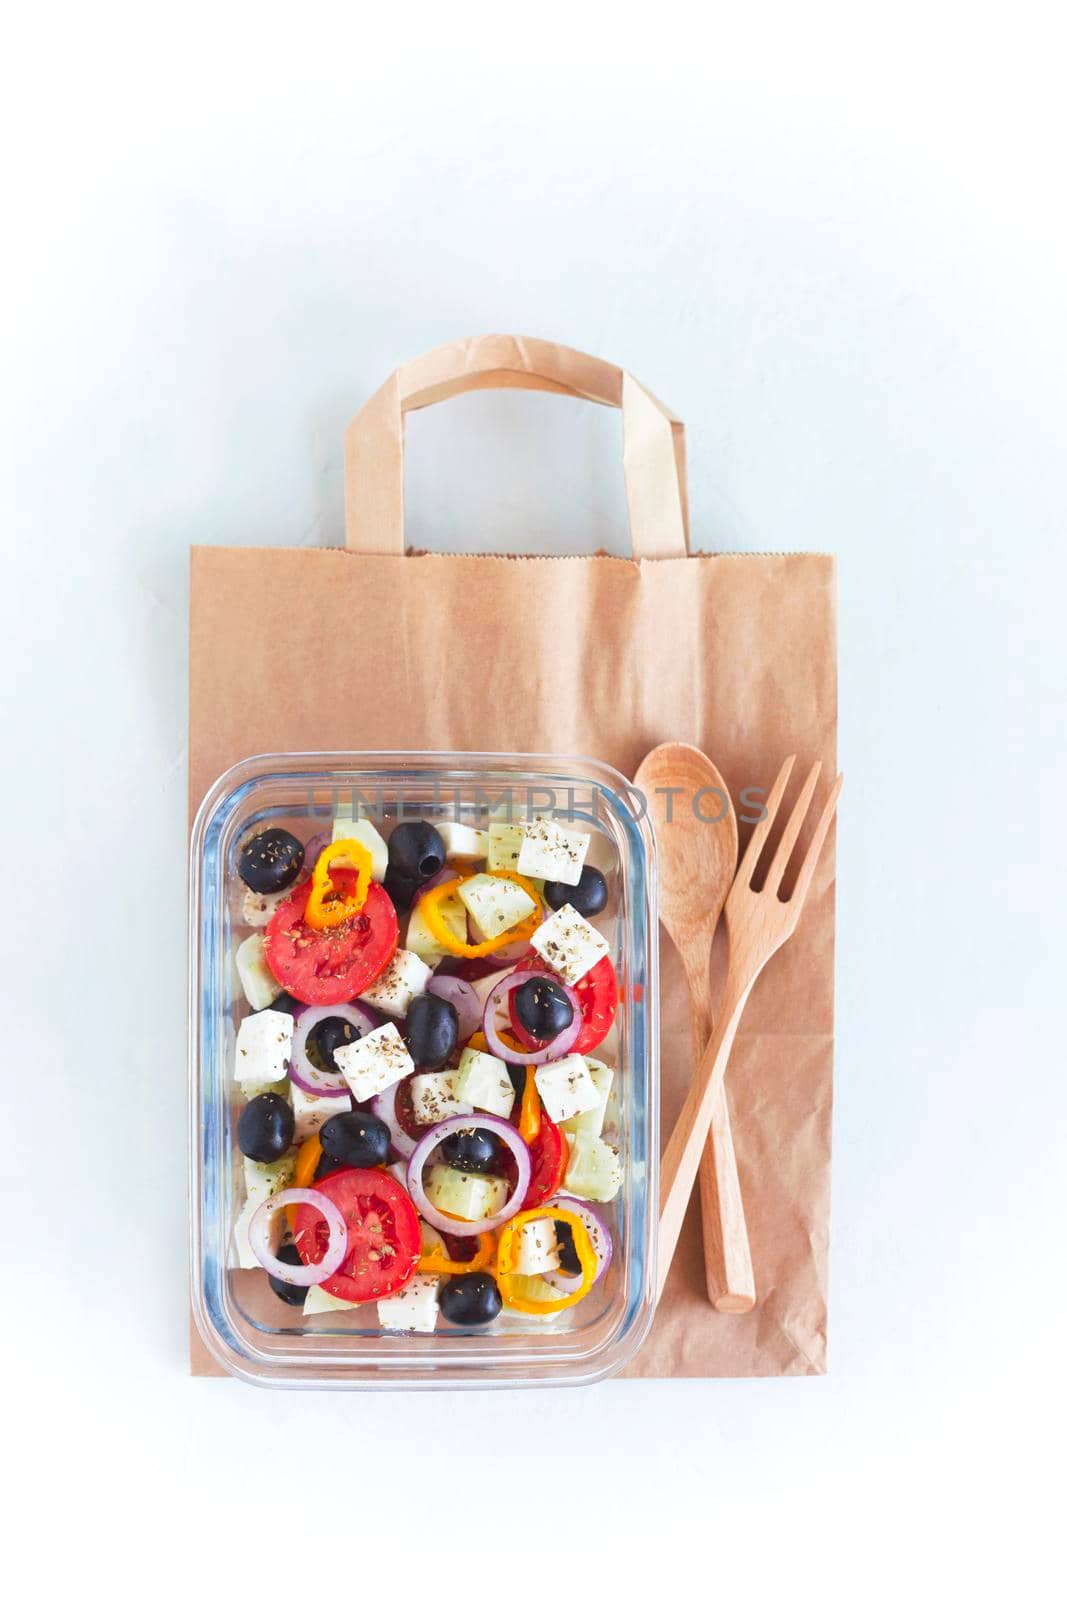 lunch box with greek salad on the paper bag with wooden fork and spoon, on white background, concept of healthy food and zero waste, top view